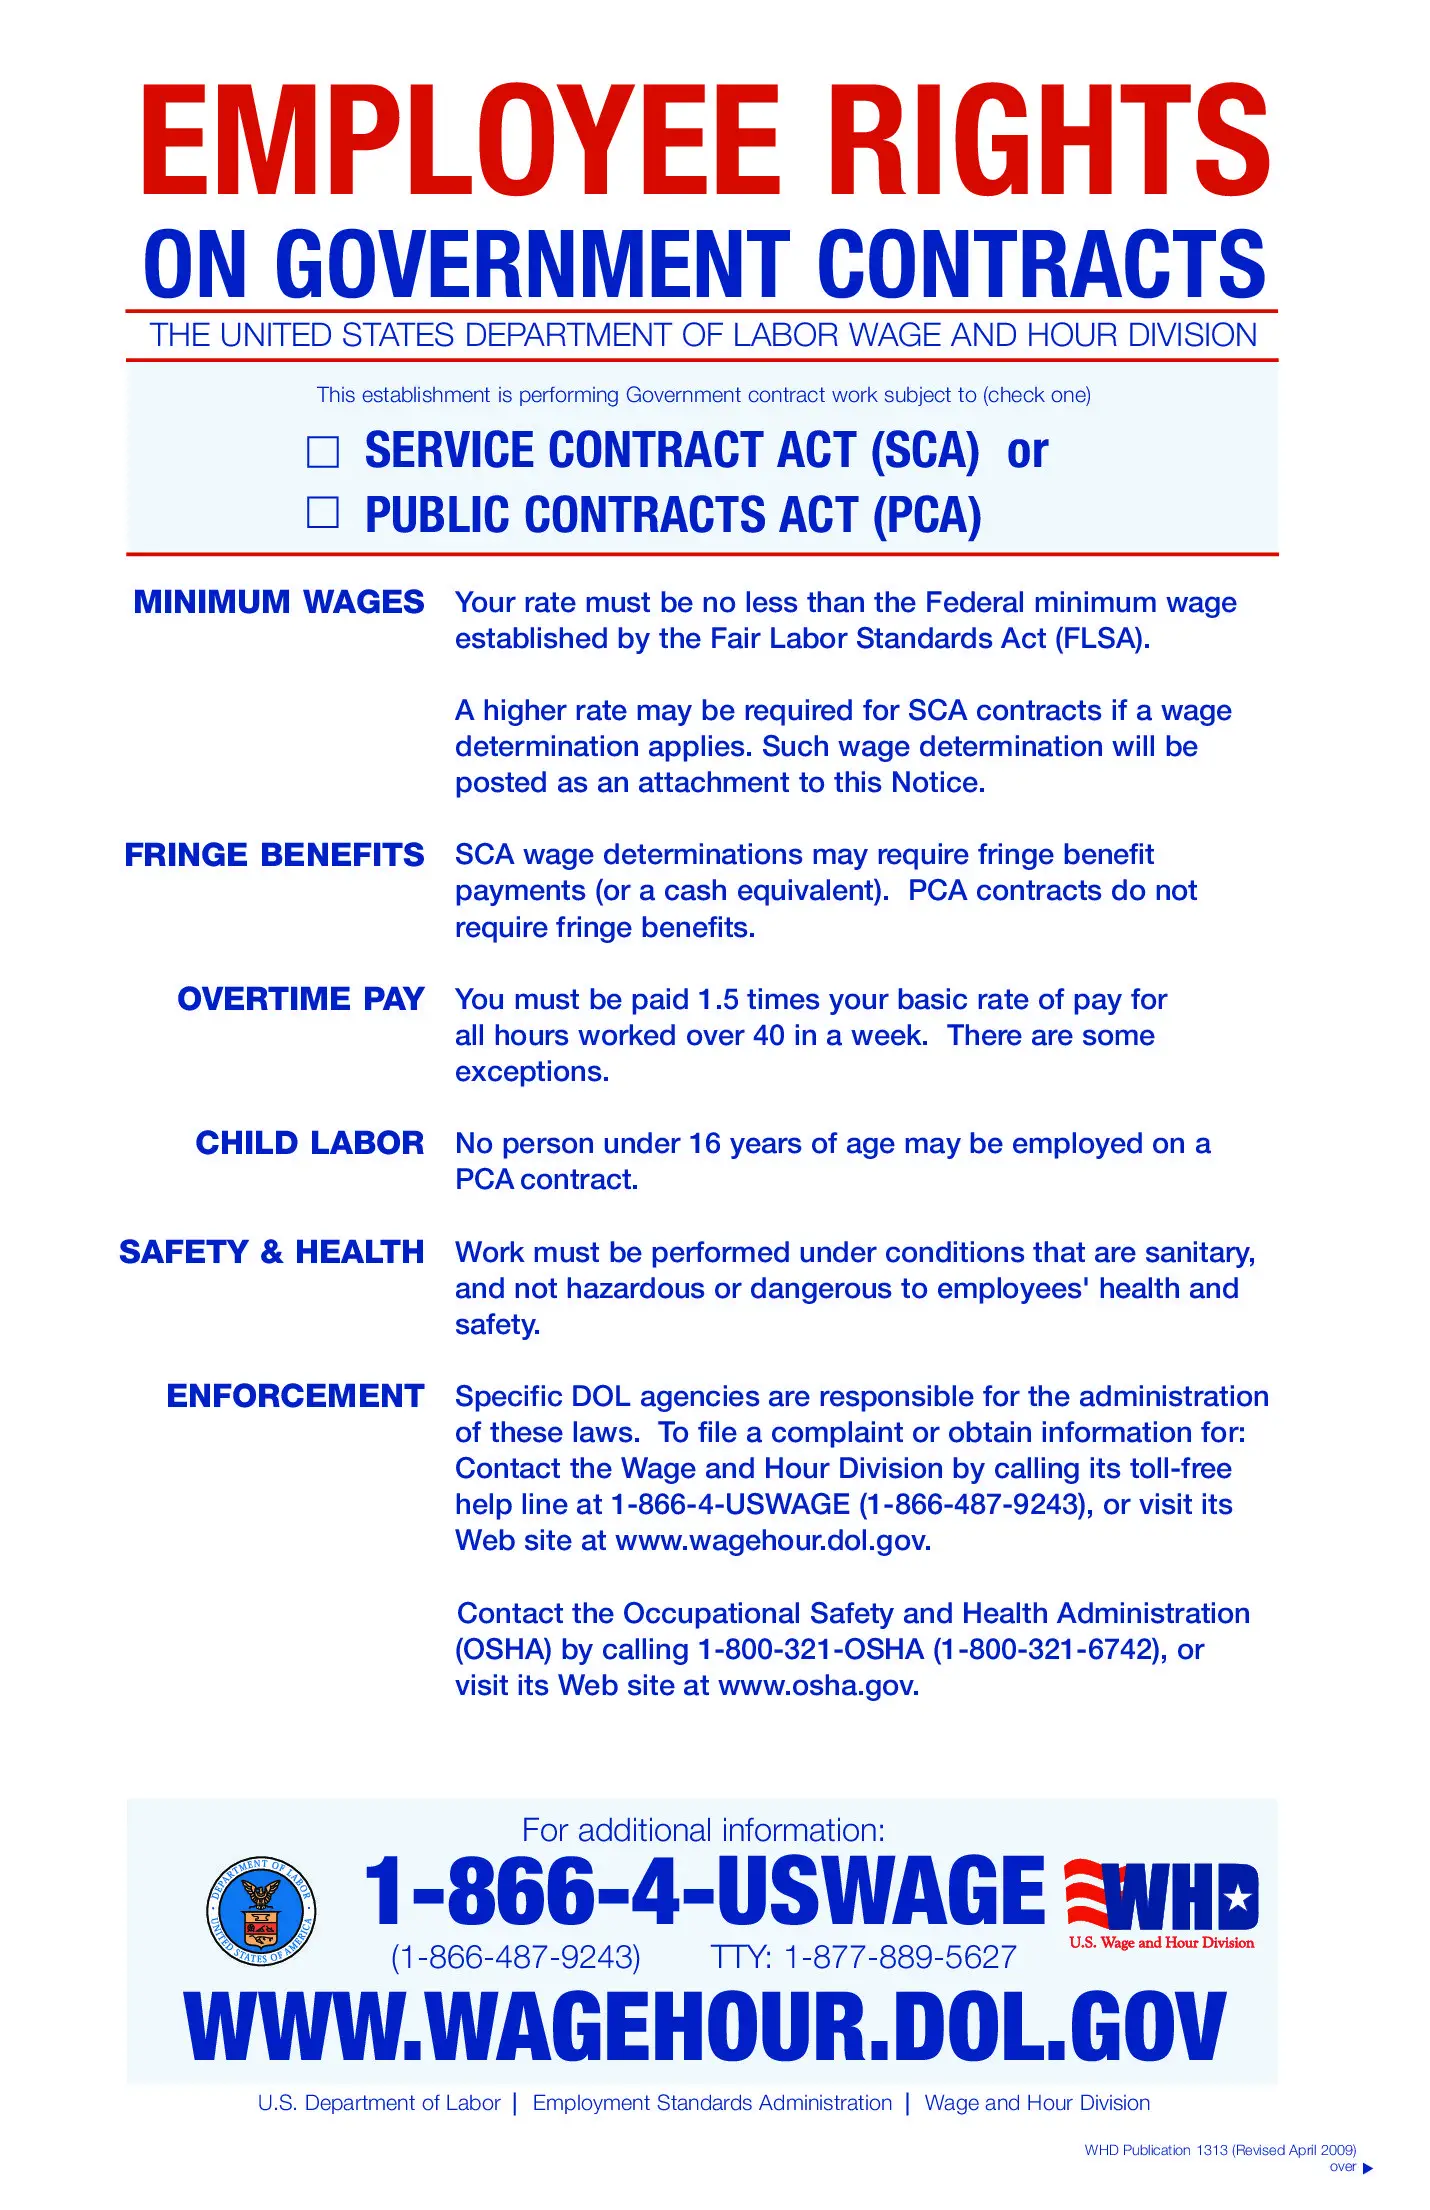 Free Federal Working on Government Contracts Labor Law Poster 2021